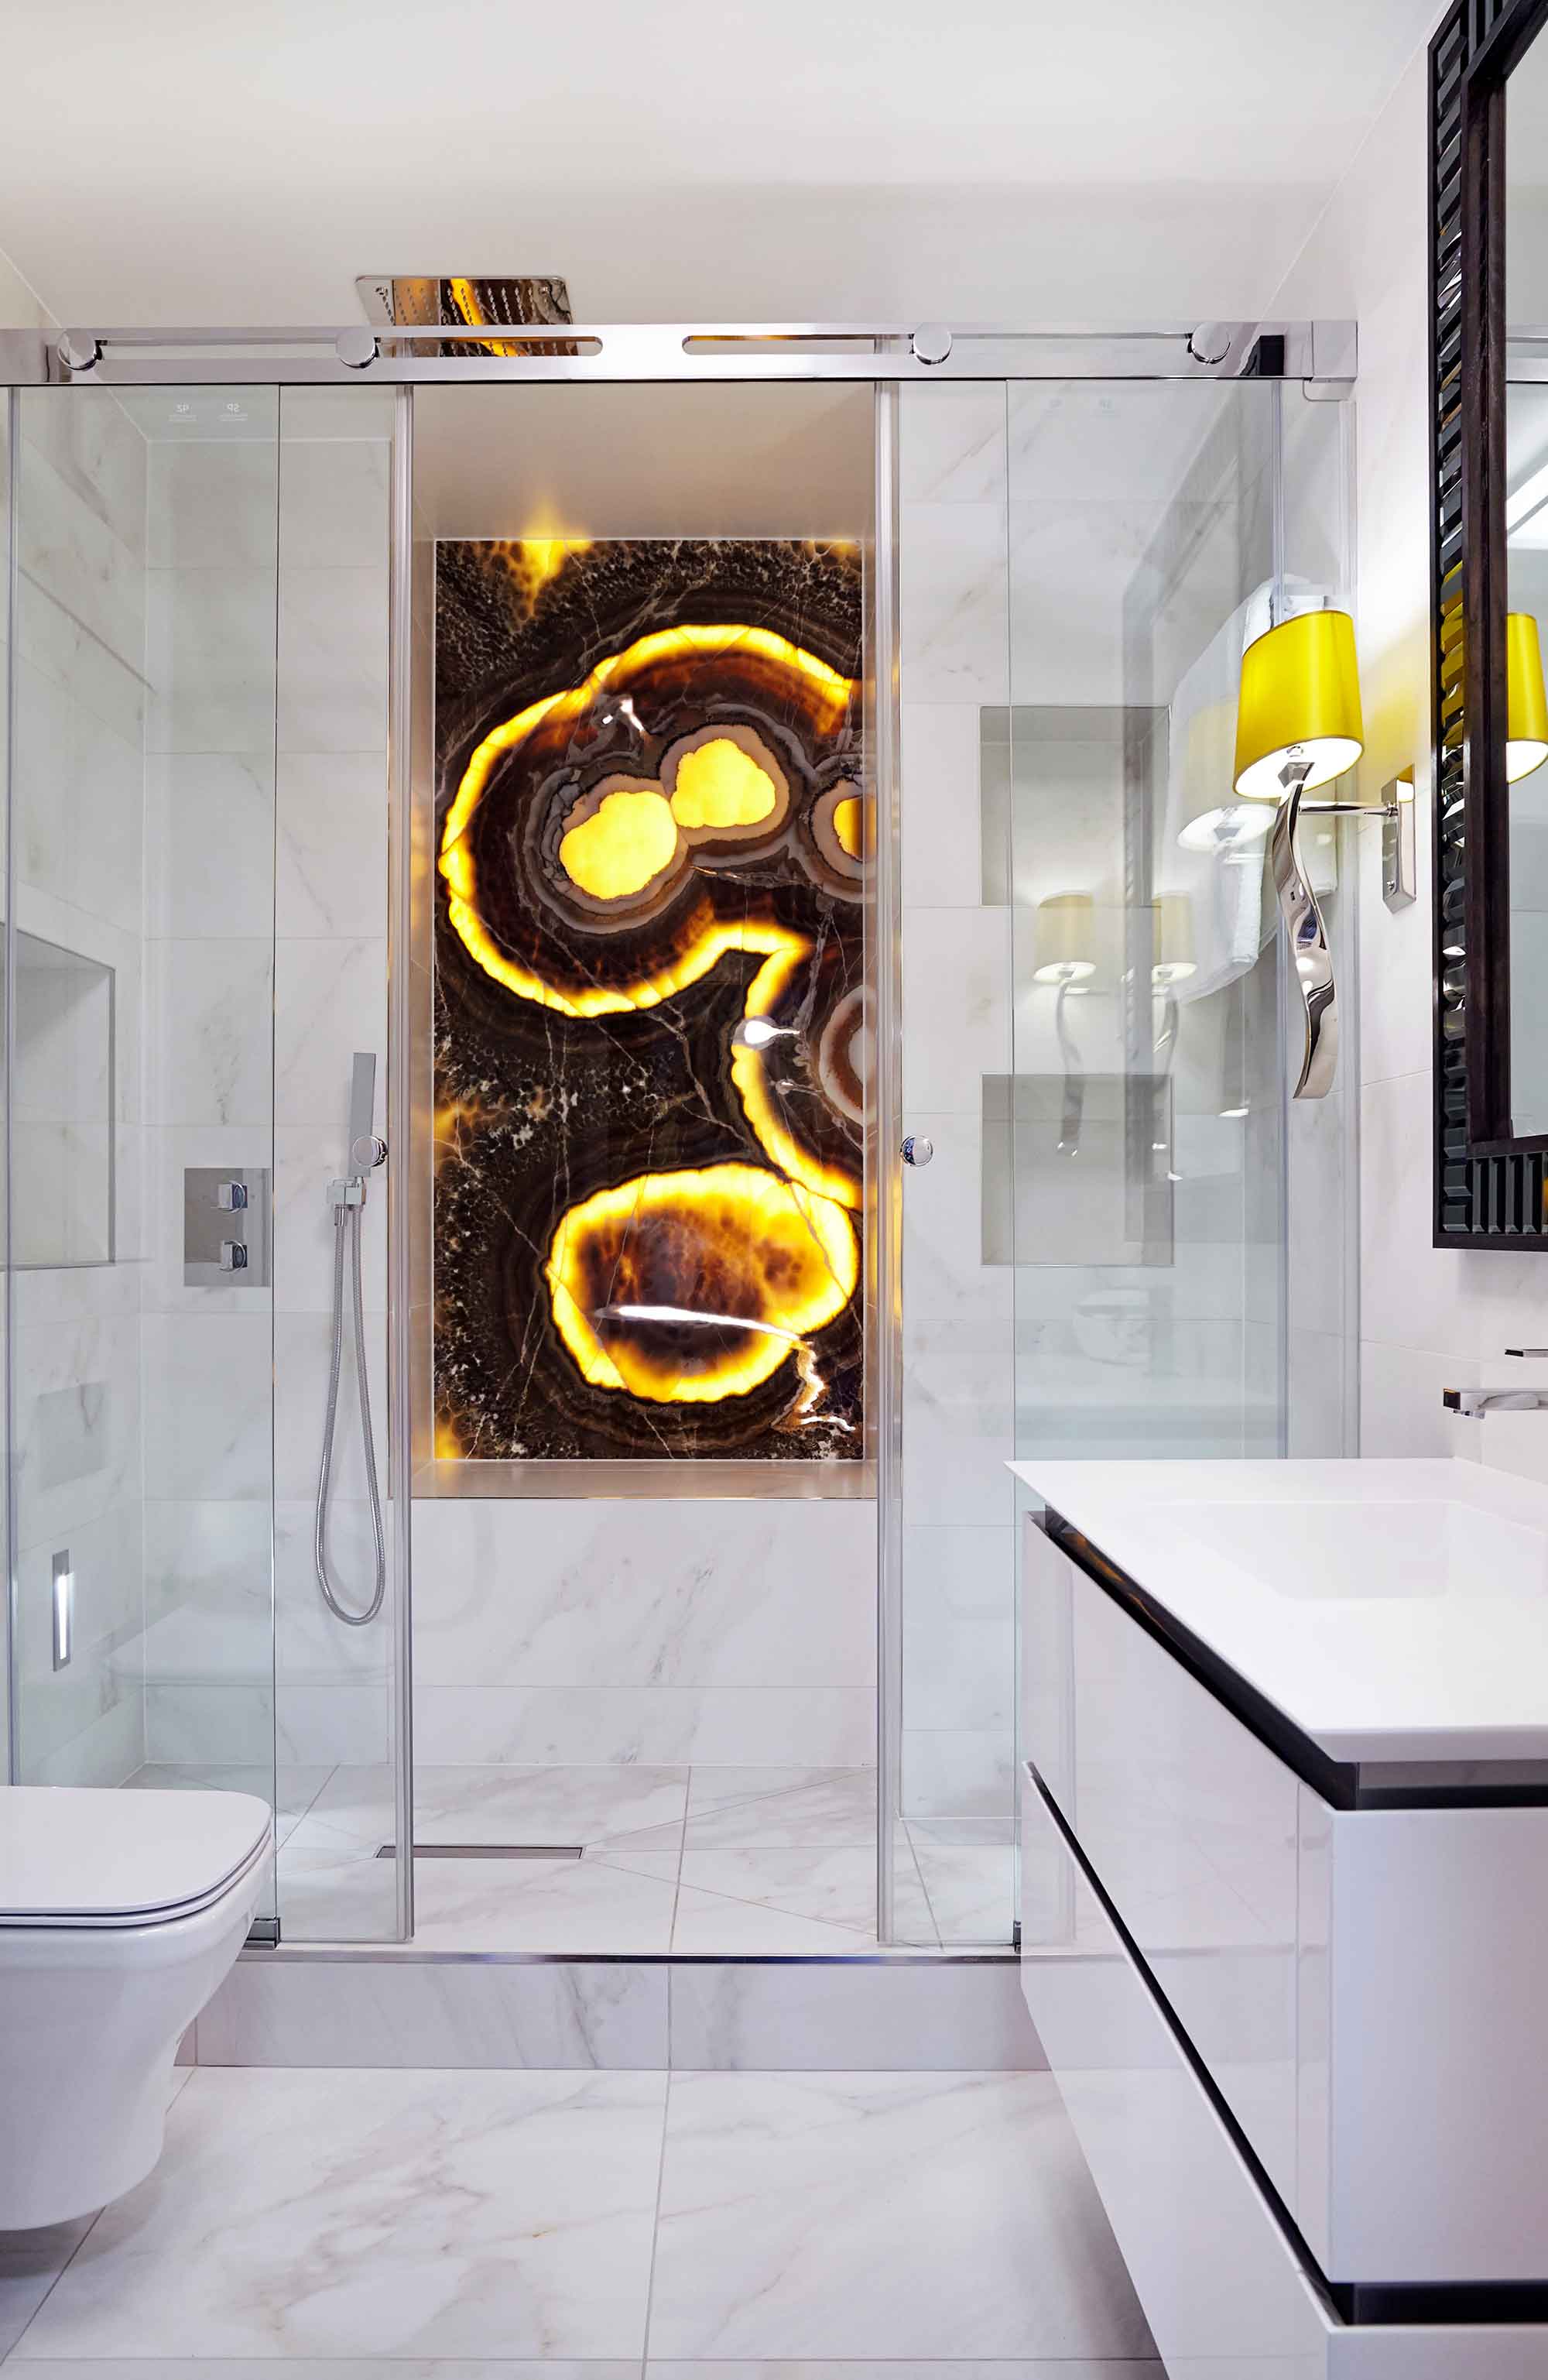 The back-lit onyx bathes the bathroom in warm light